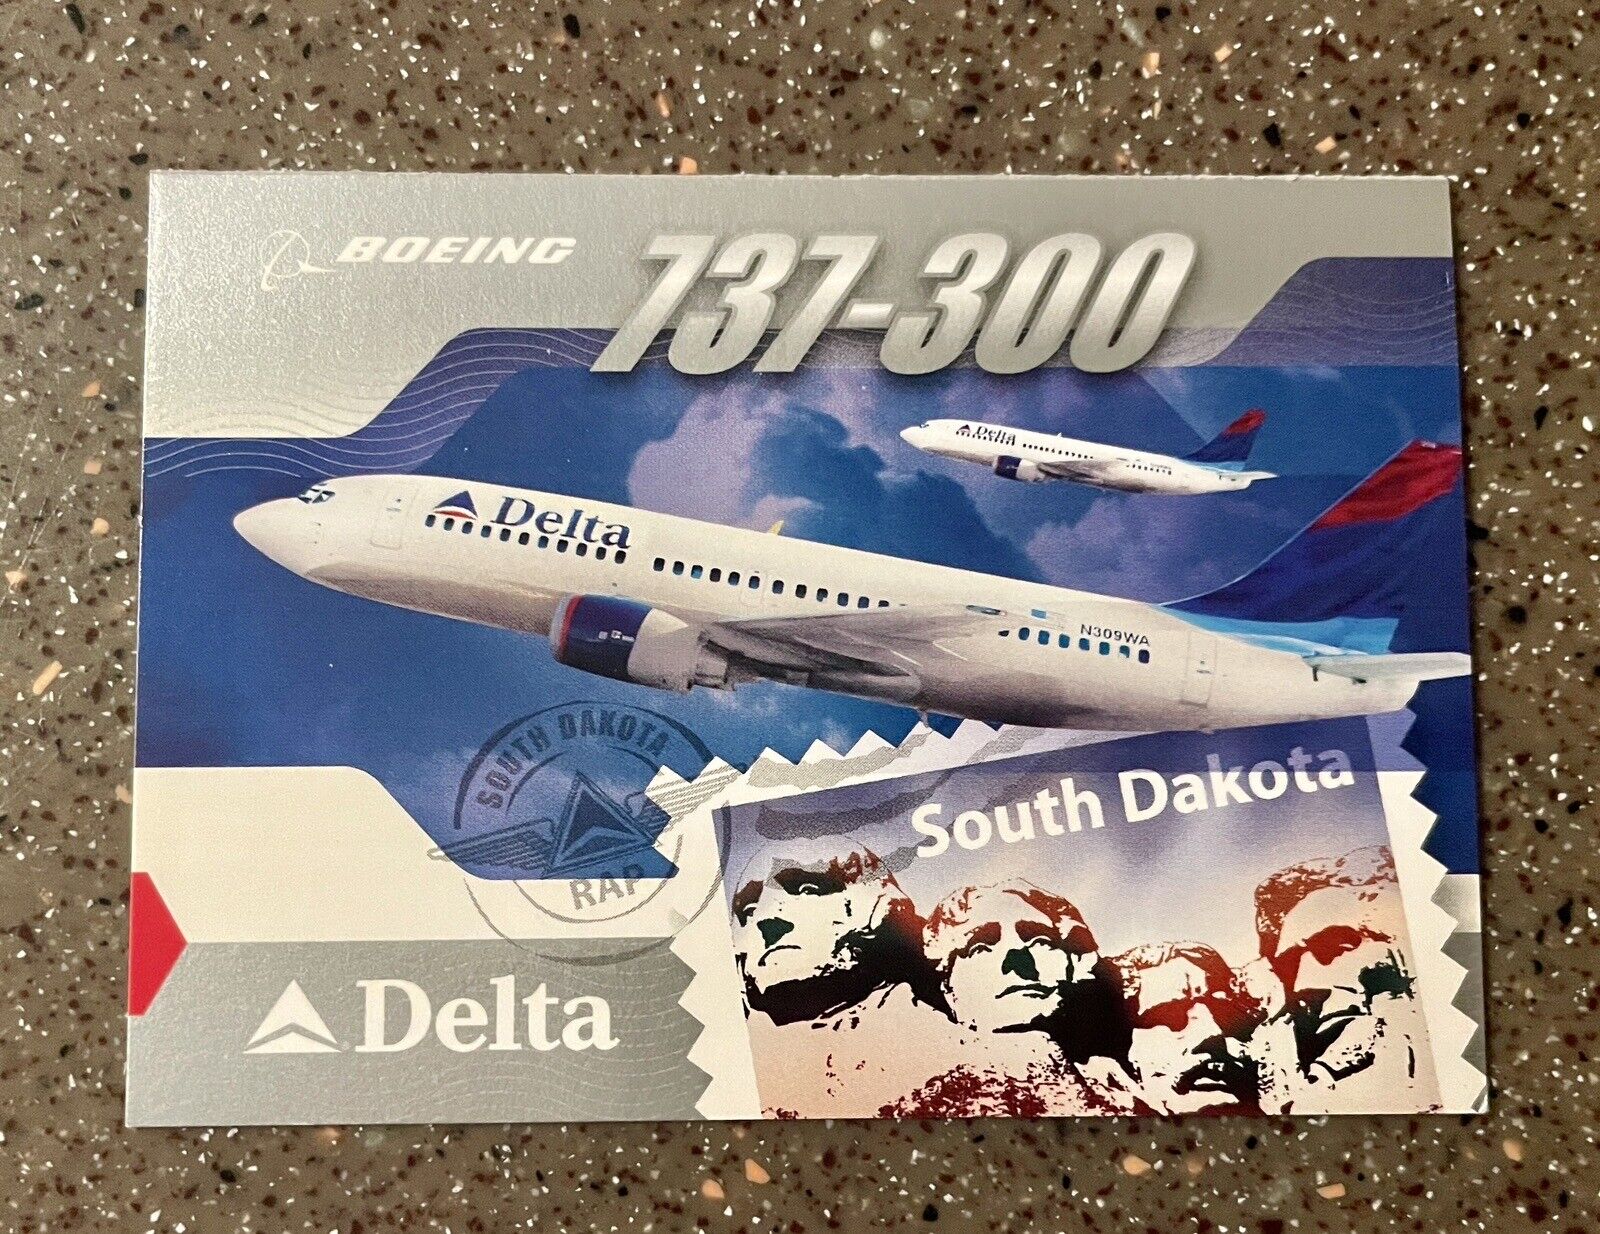 VHTF Delta Air Lines Pilot Trading Card from 2004, Card #15 Boeing 737-300